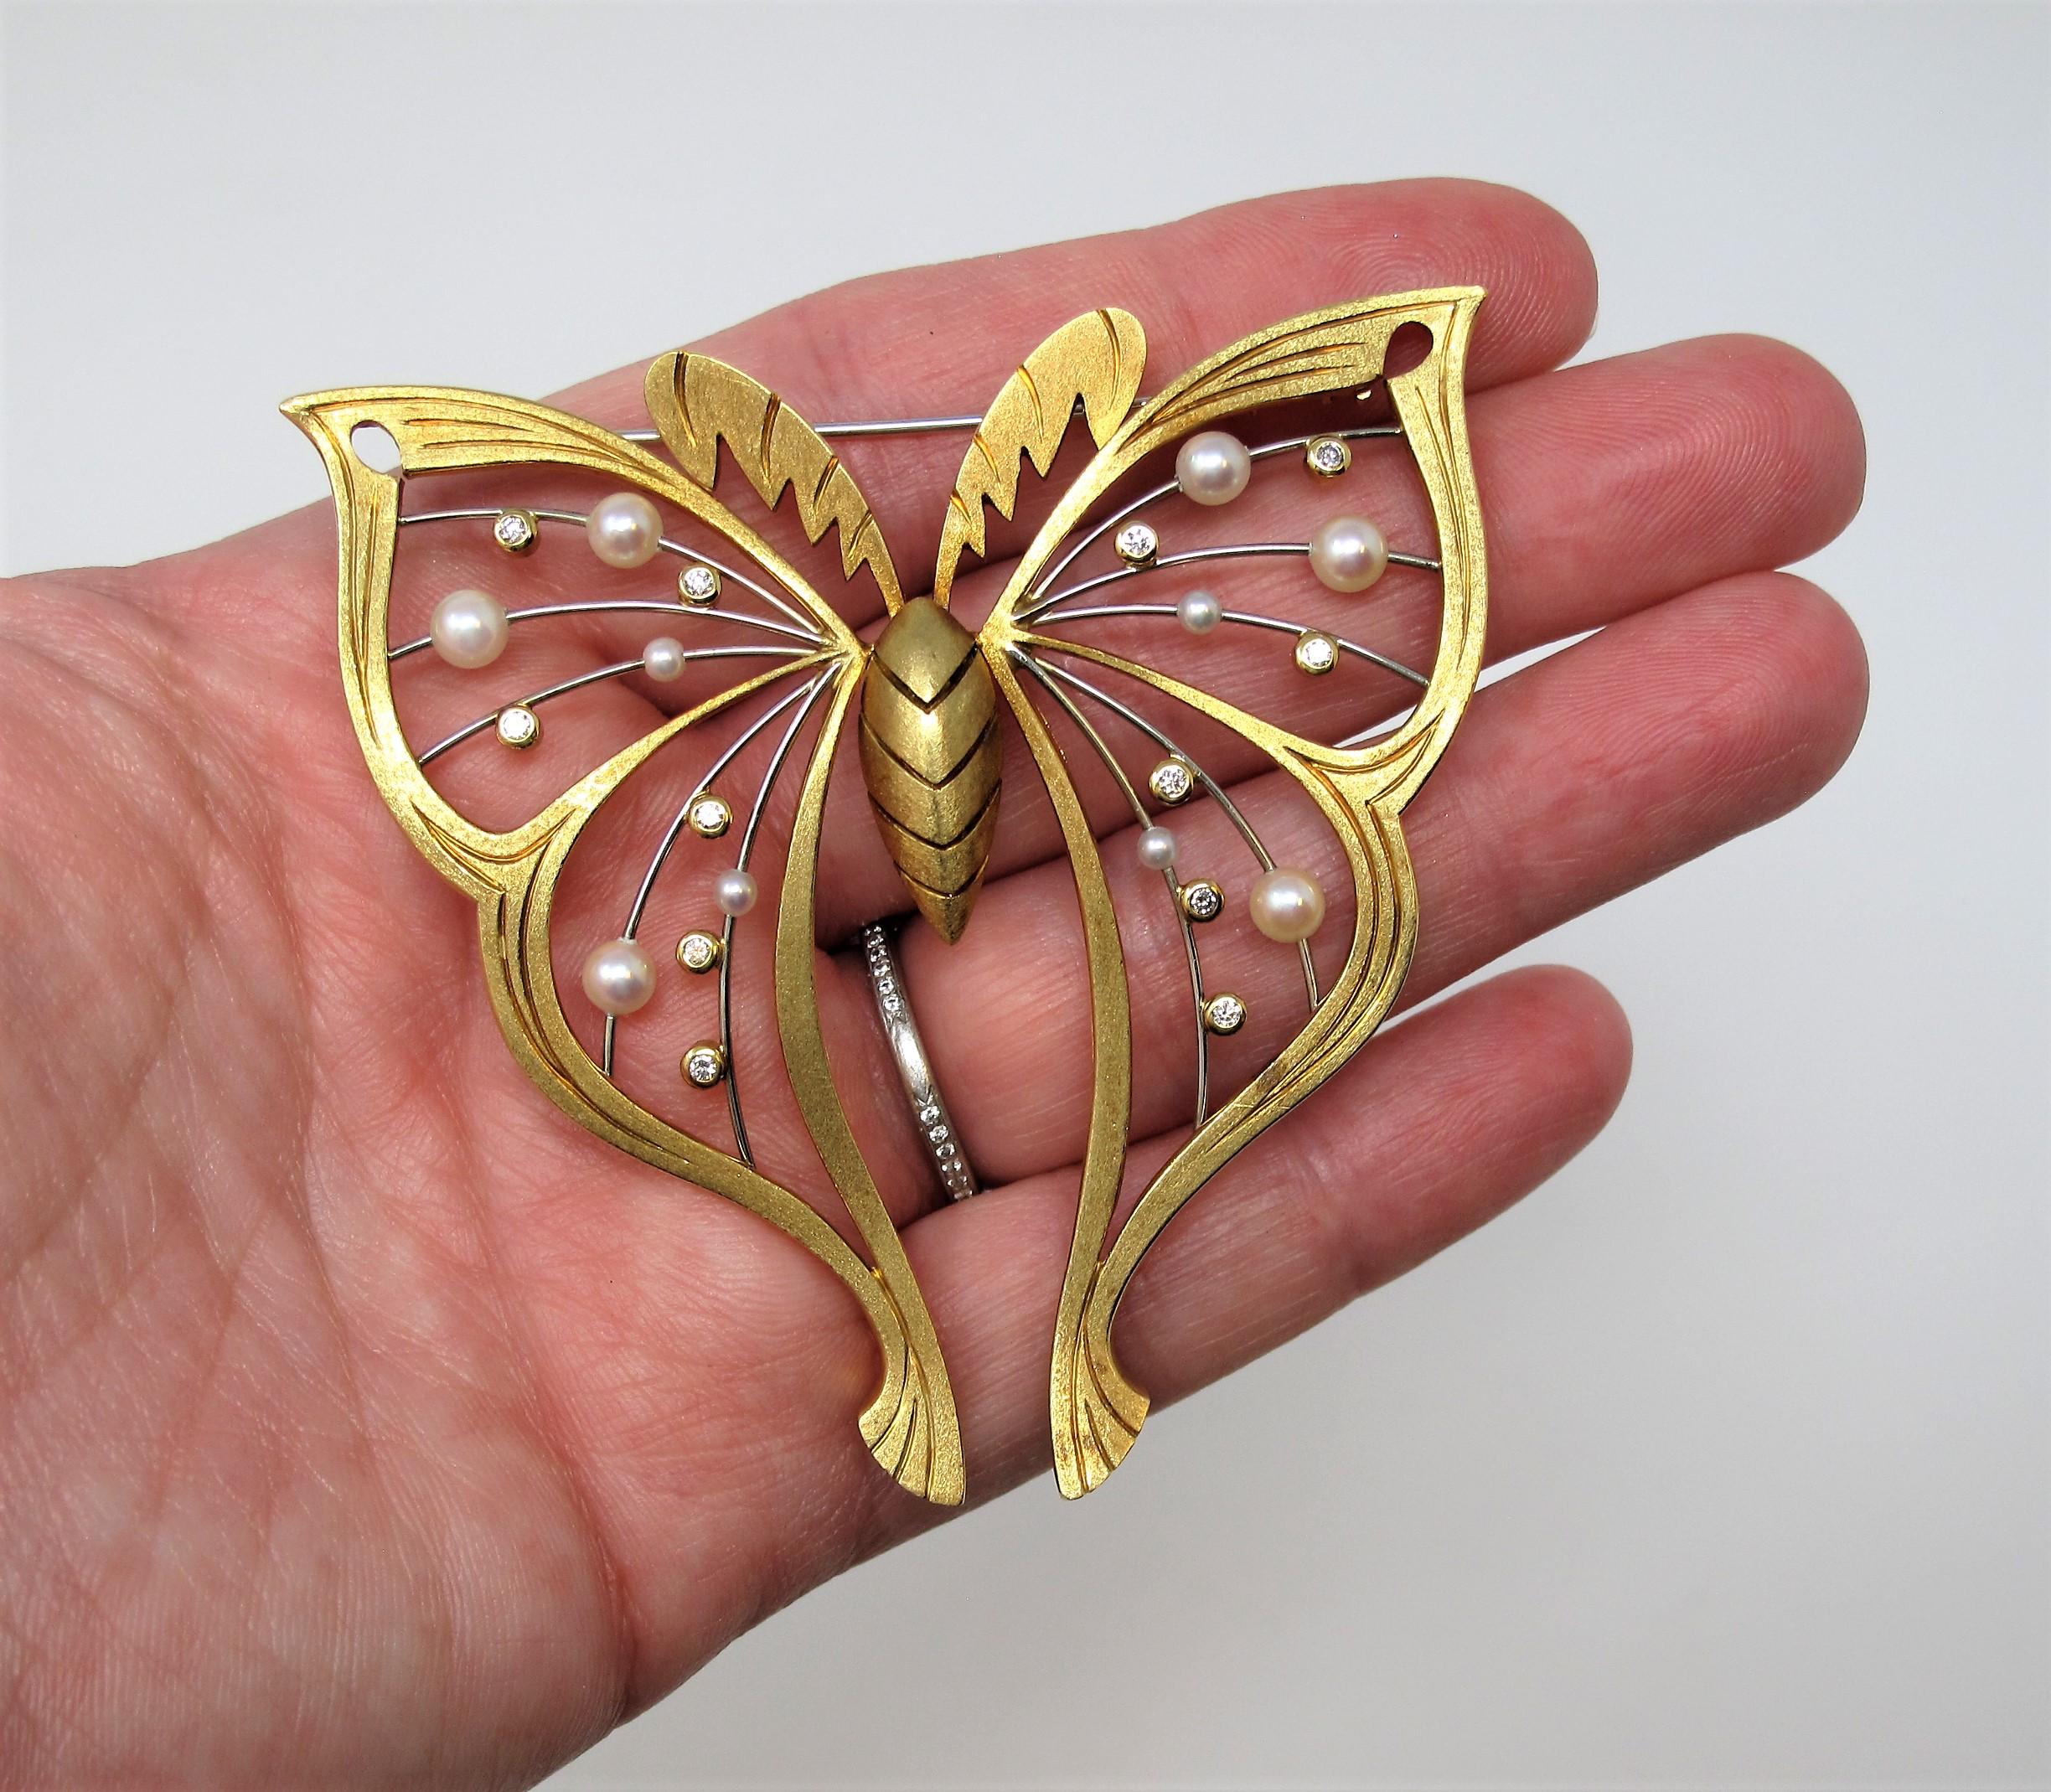 Beautiful and unique handmade 18 karat yellow gold butterfly brooch. This incredible piece is substantial in size and design, while still appearing delicate. Accented by glistening diamonds and pearls, we love how this brooch boasts a modern yet